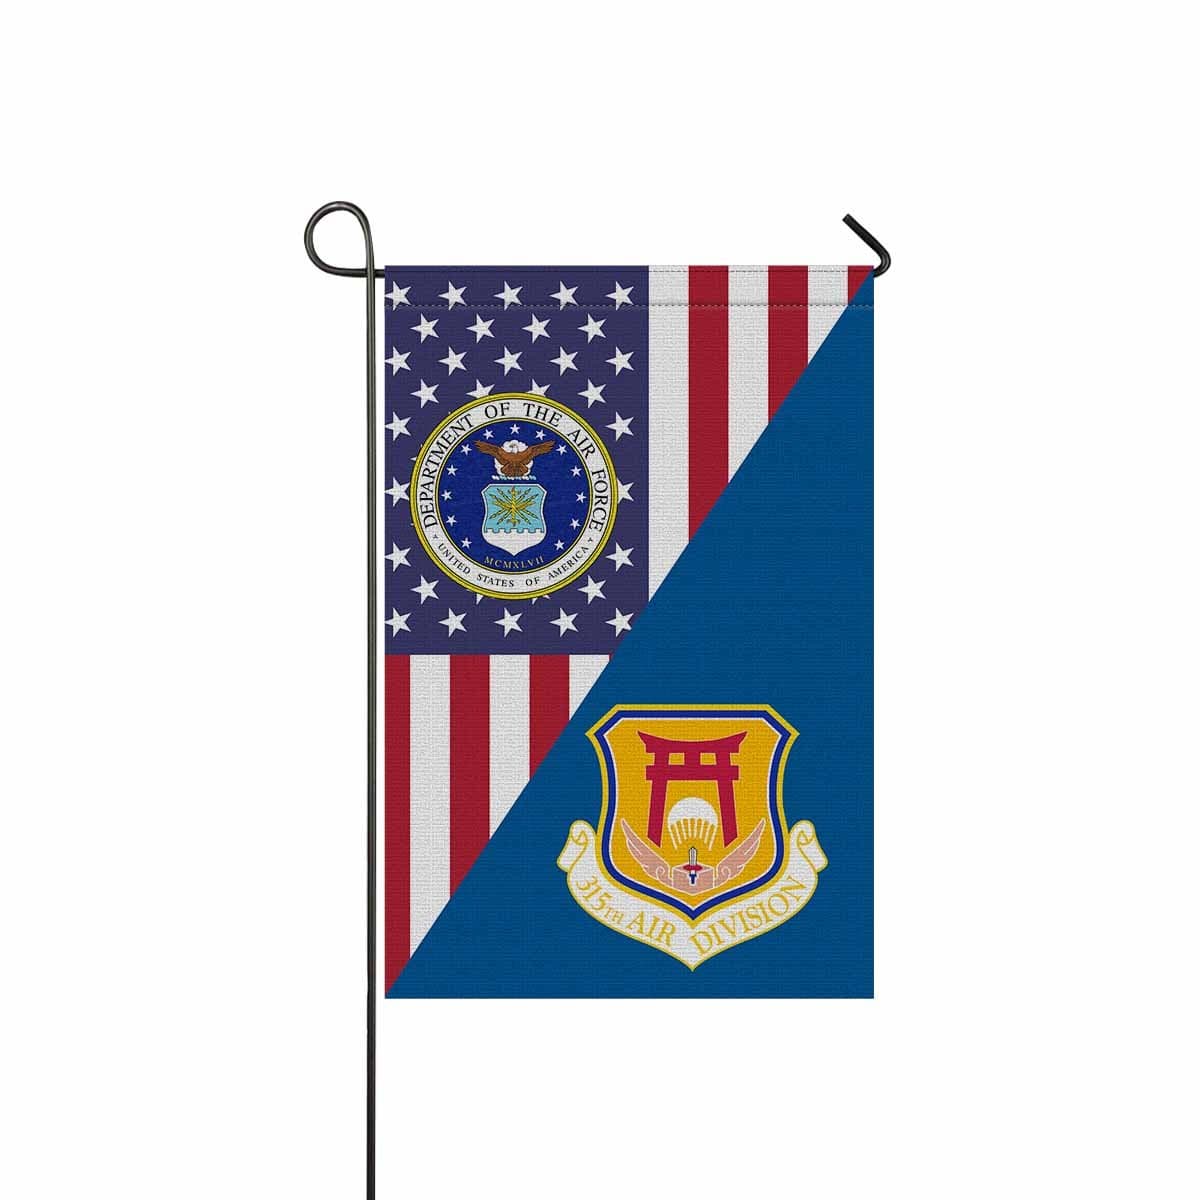 US Air Force Emblem of the USAF 315th Air Division (1950s) Garden Flag/Yard Flag 12 inches x 18 inches Twin-Side Printing-GDFlag-USAF-AirDivision-Veterans Nation